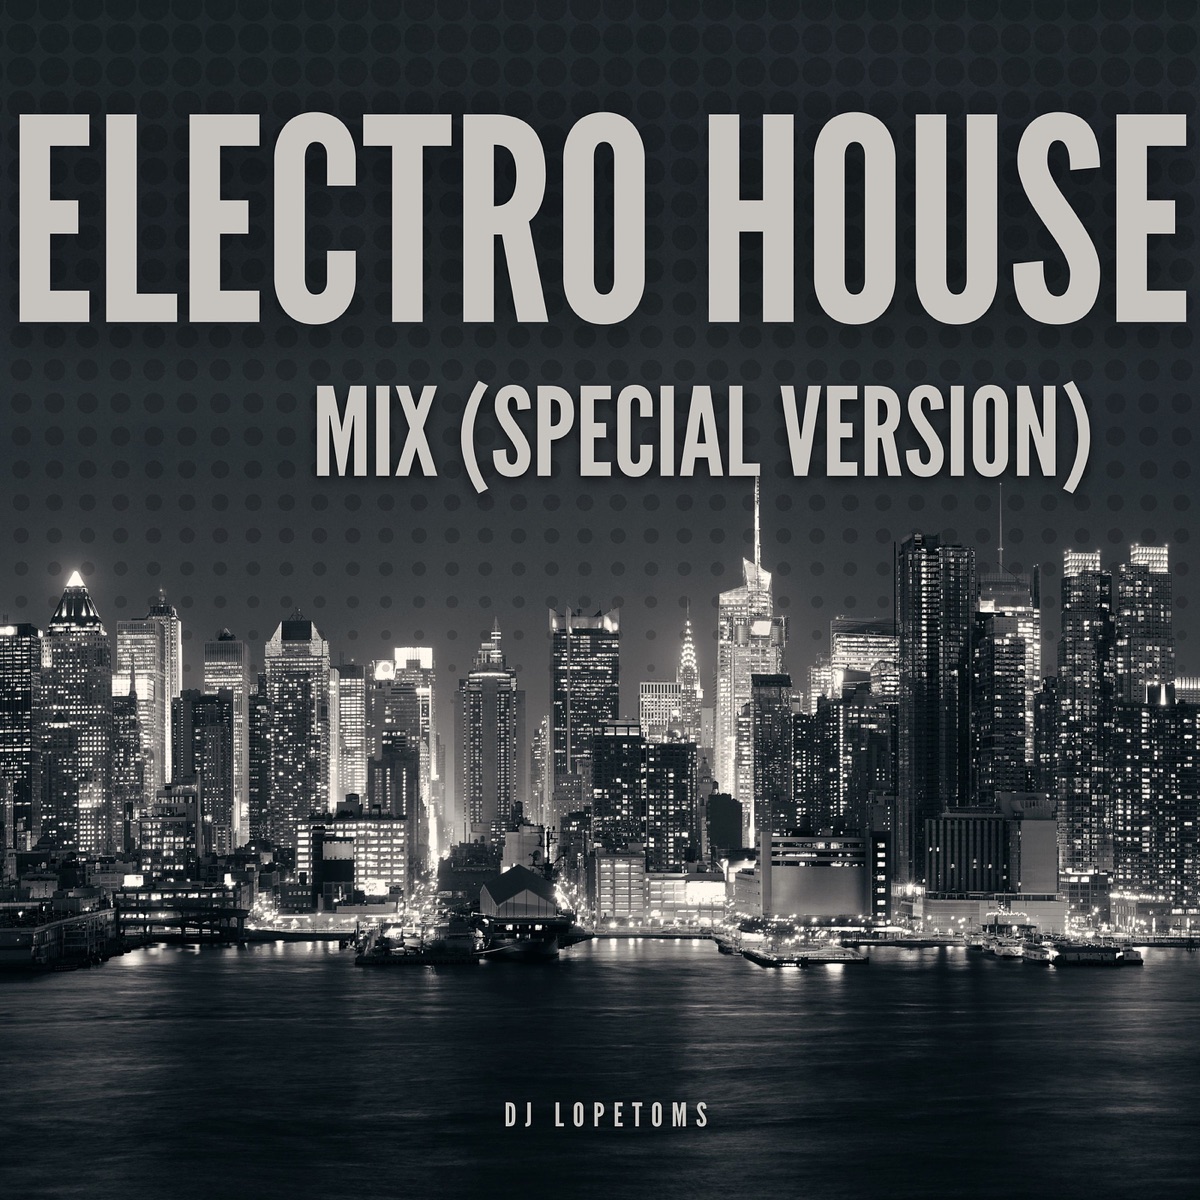 Electro House Mix (Special Version) - Album by DJ Lopetoms - Apple Music